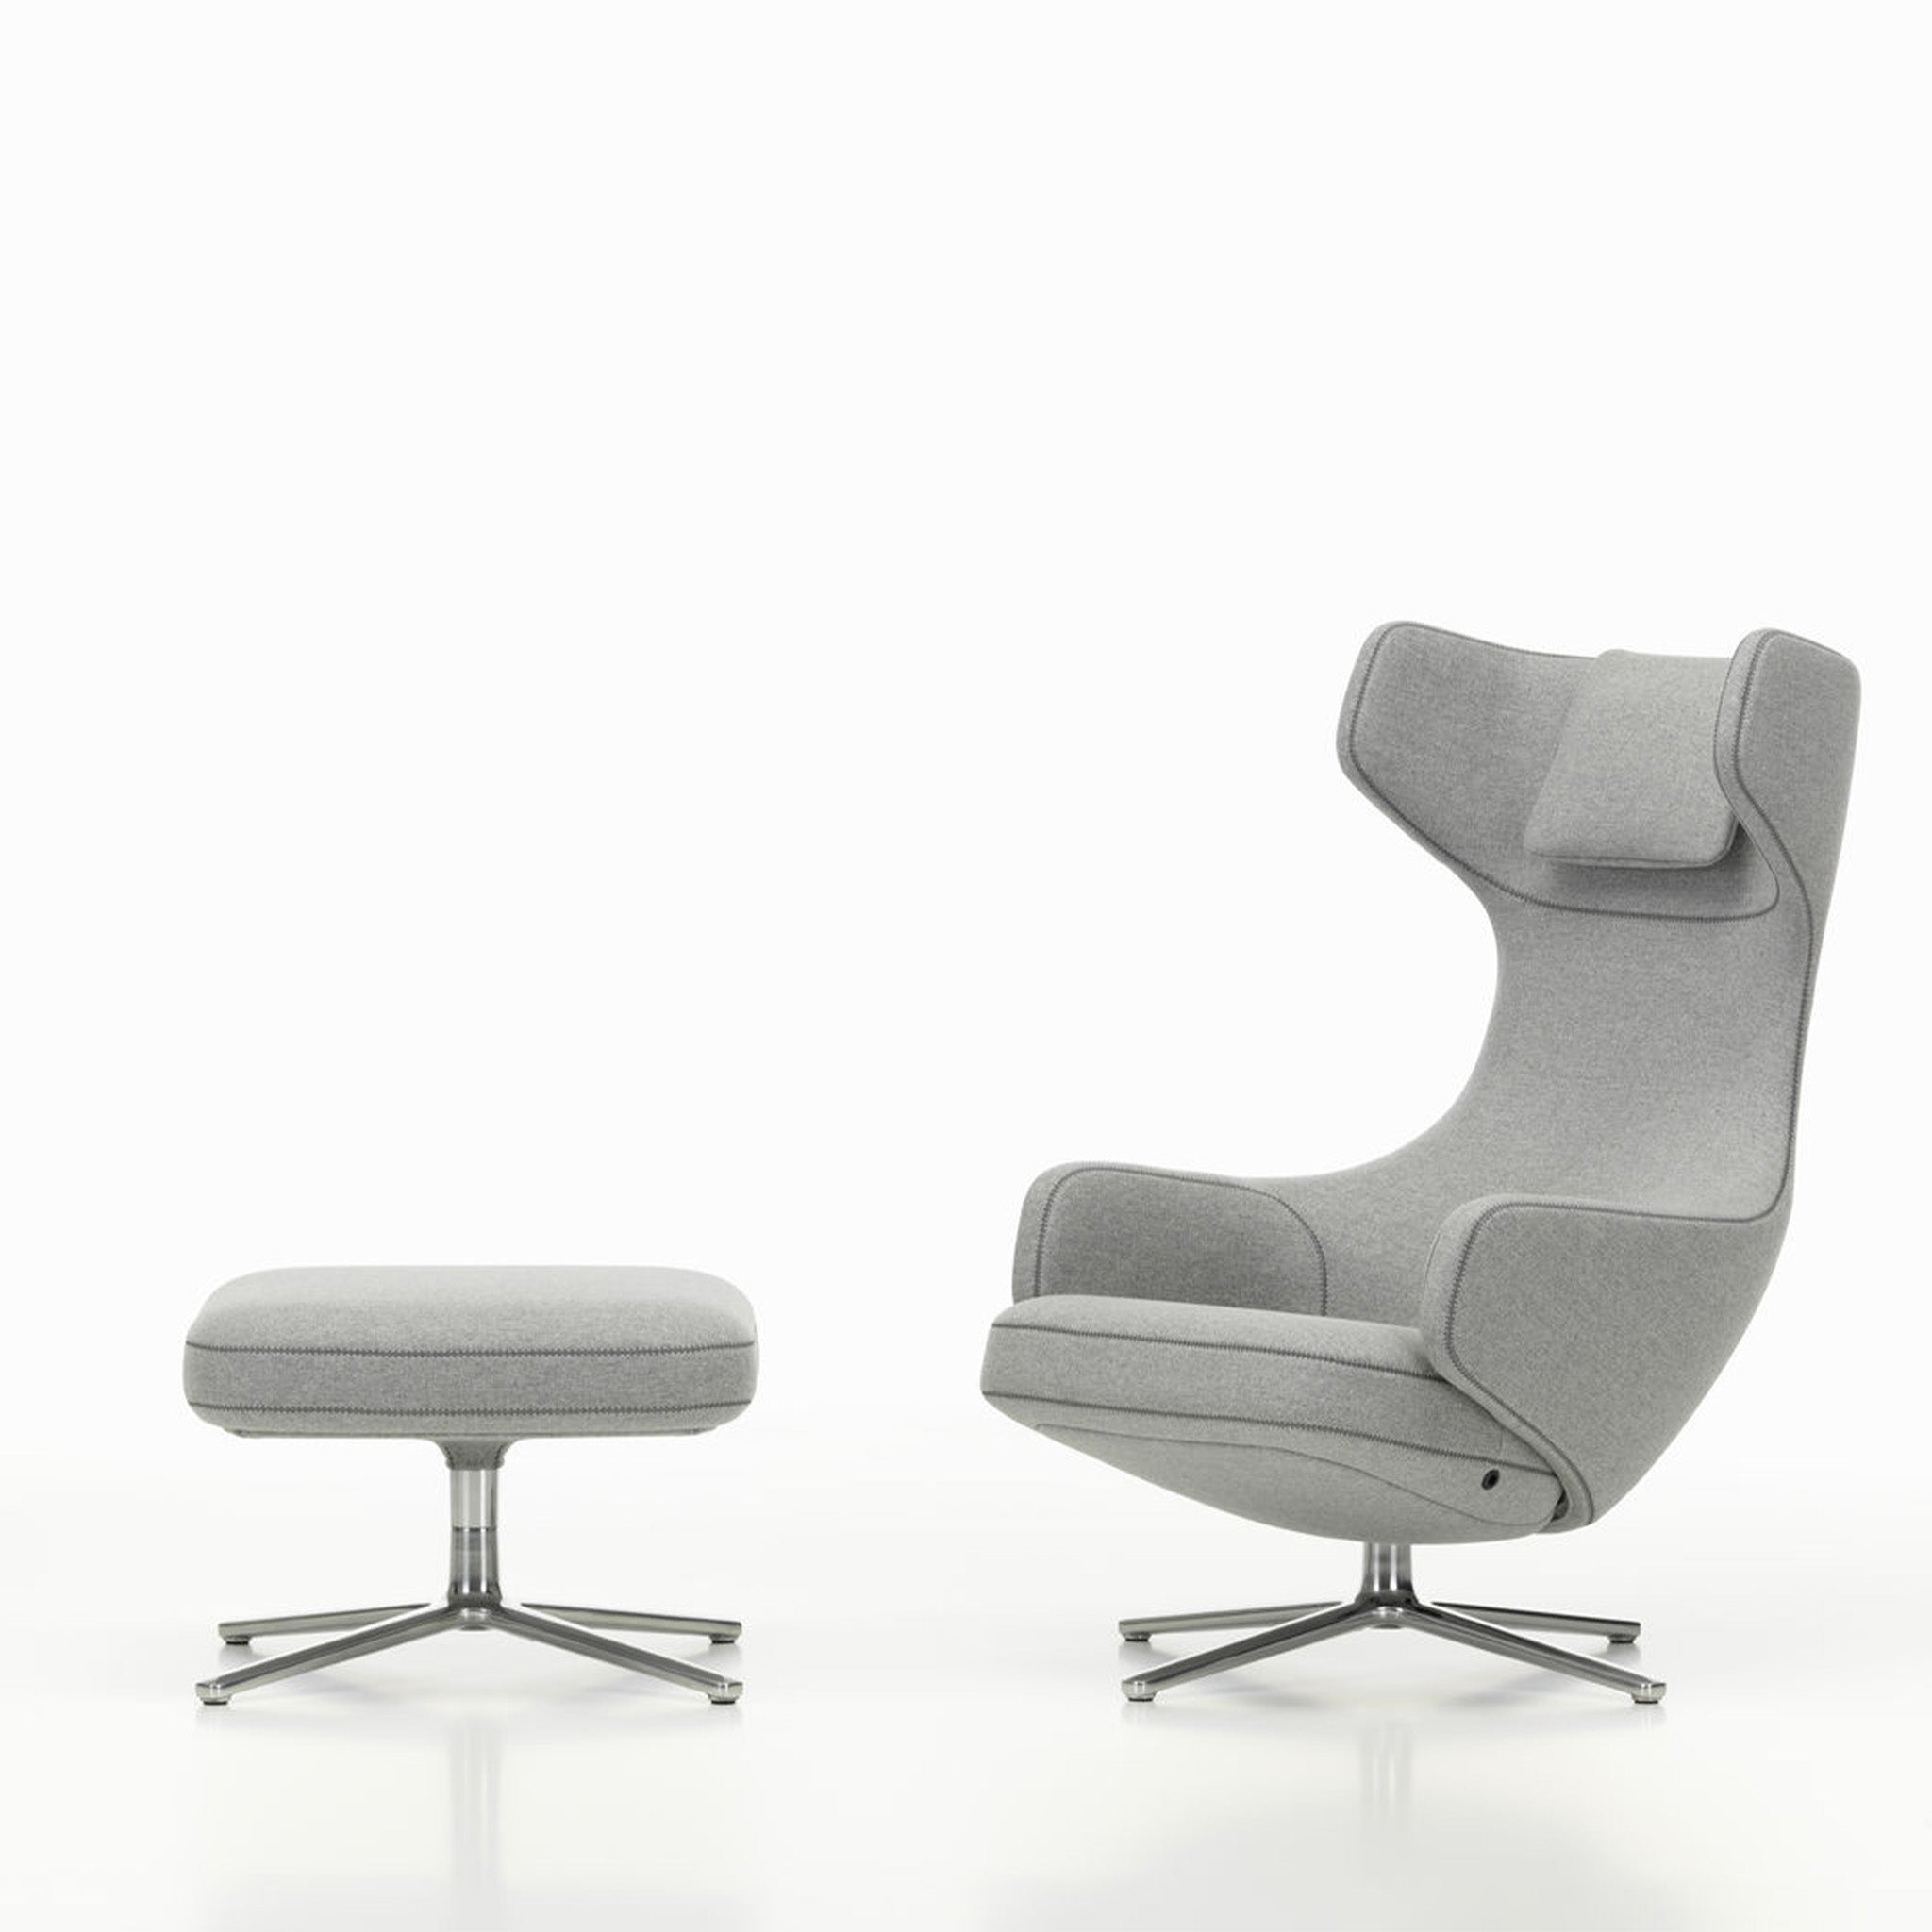 Grand Repos Lounge Chair By Antonio Citterio for Vitra